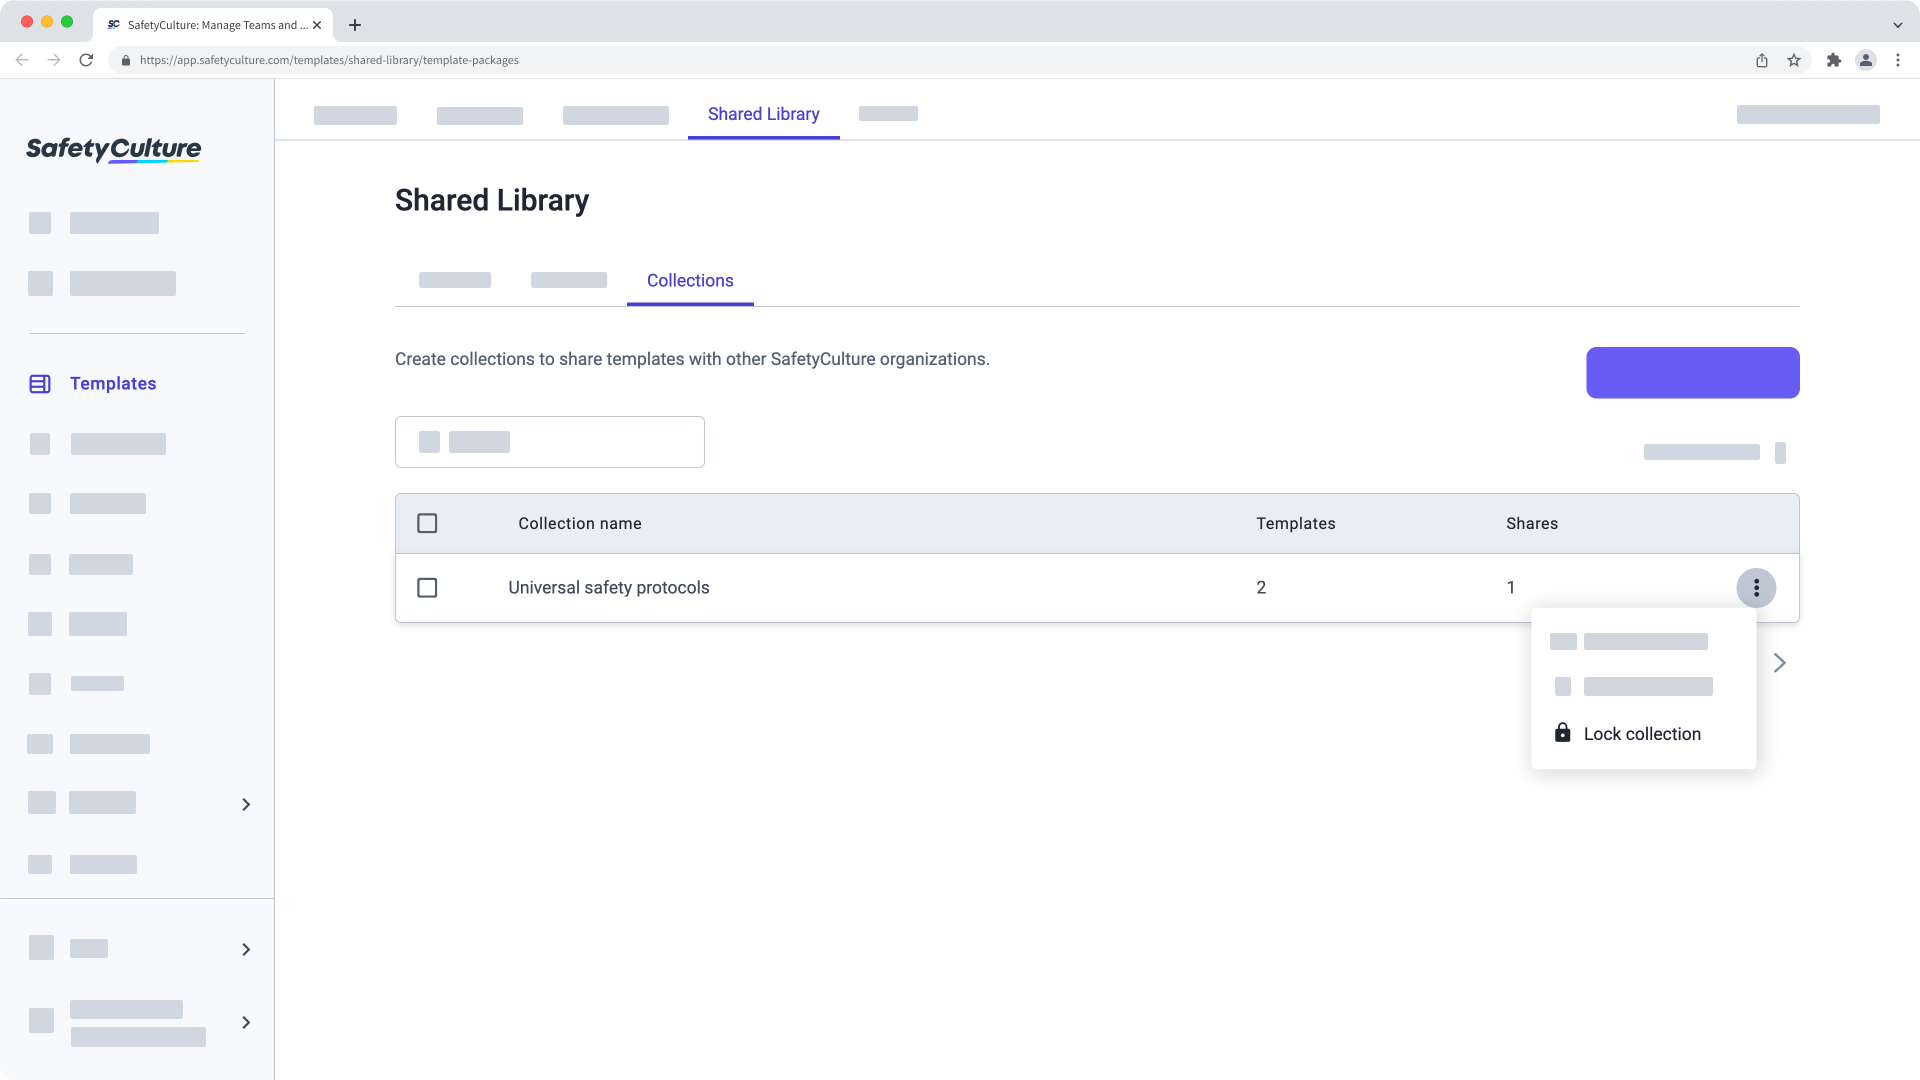 Lock a Shared Library template collection via the web app.